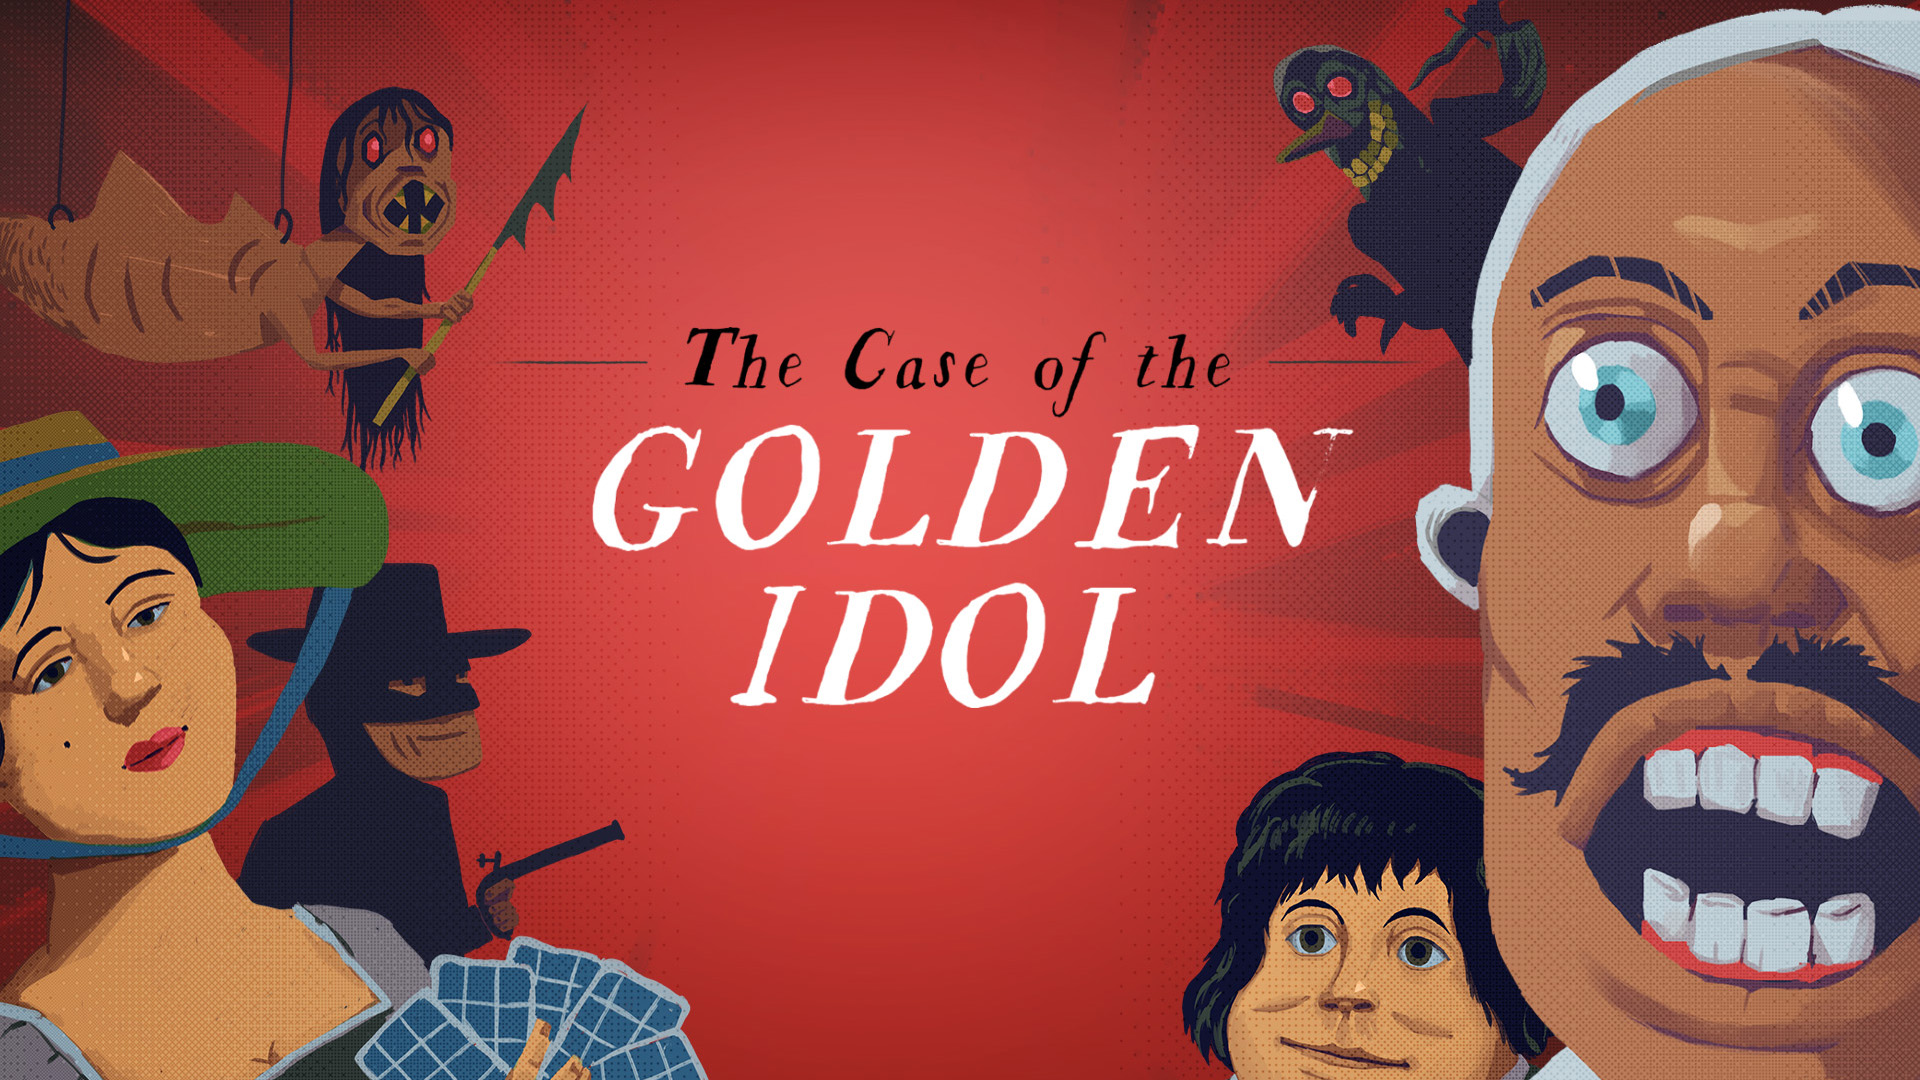 The Case of the Golden Idol Artwork